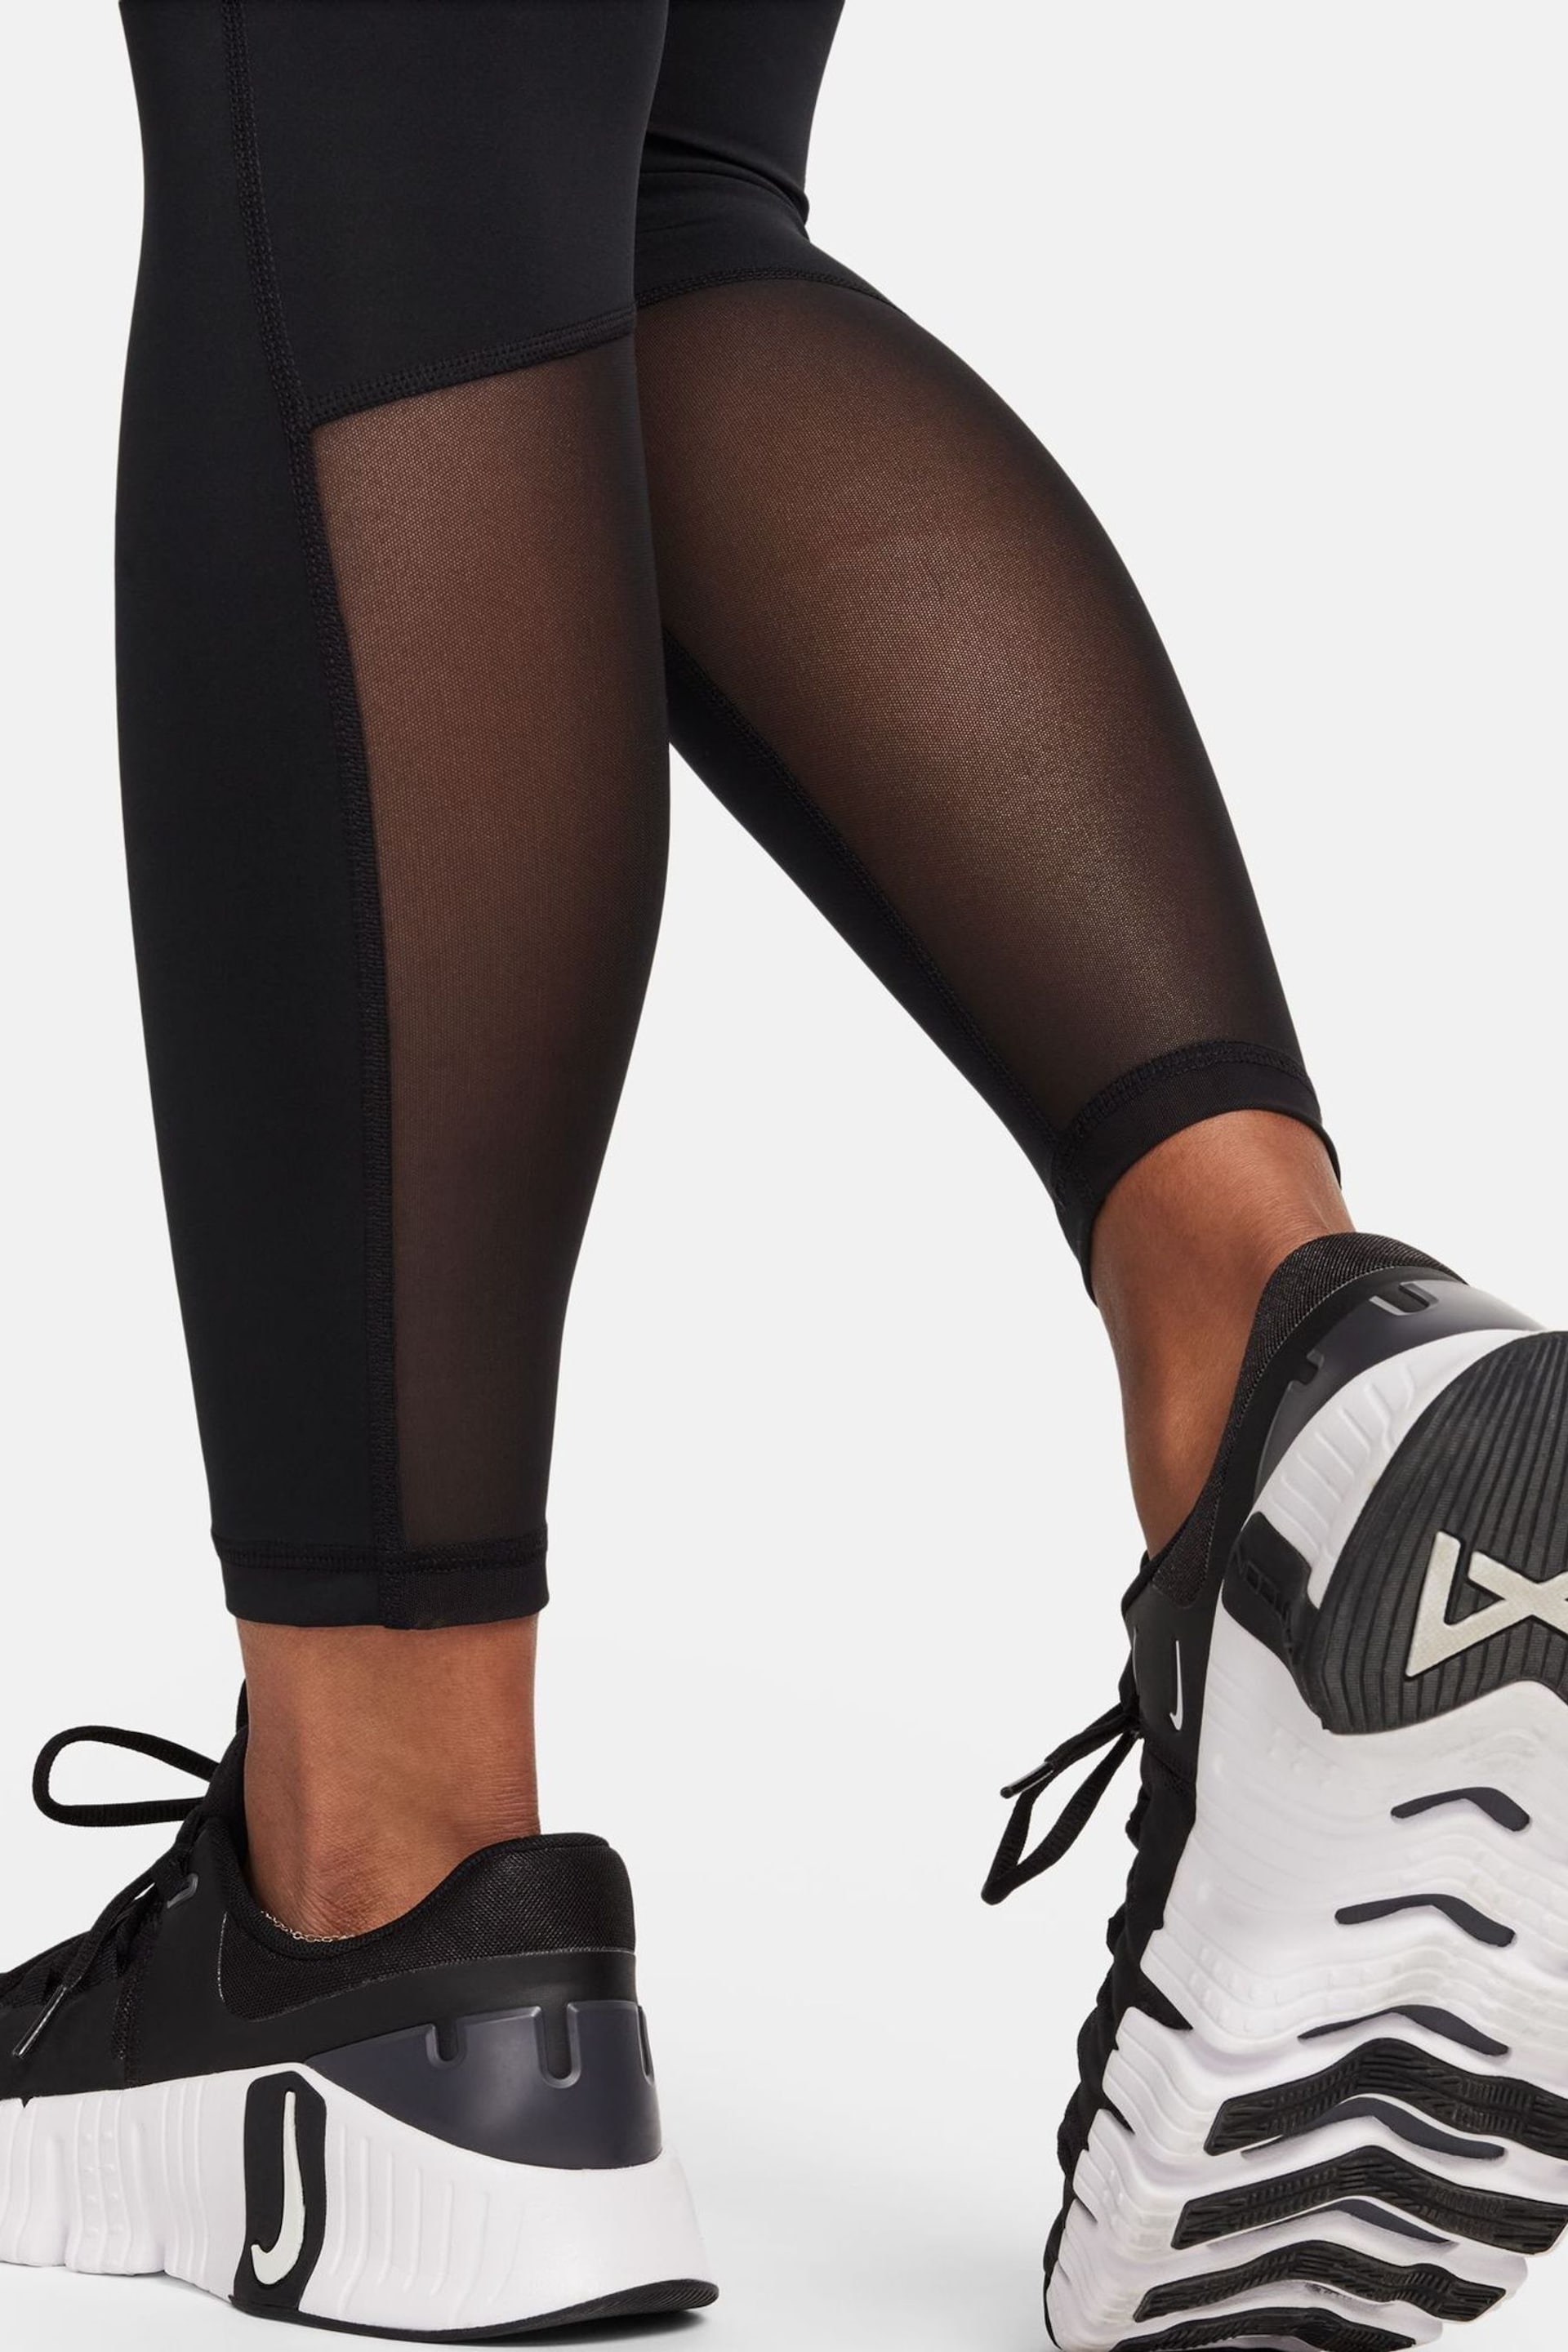 Nike Black Pro Dri-FIT 365 Mid-Rise 7/8 Leggings with Pockets - Image 6 of 7